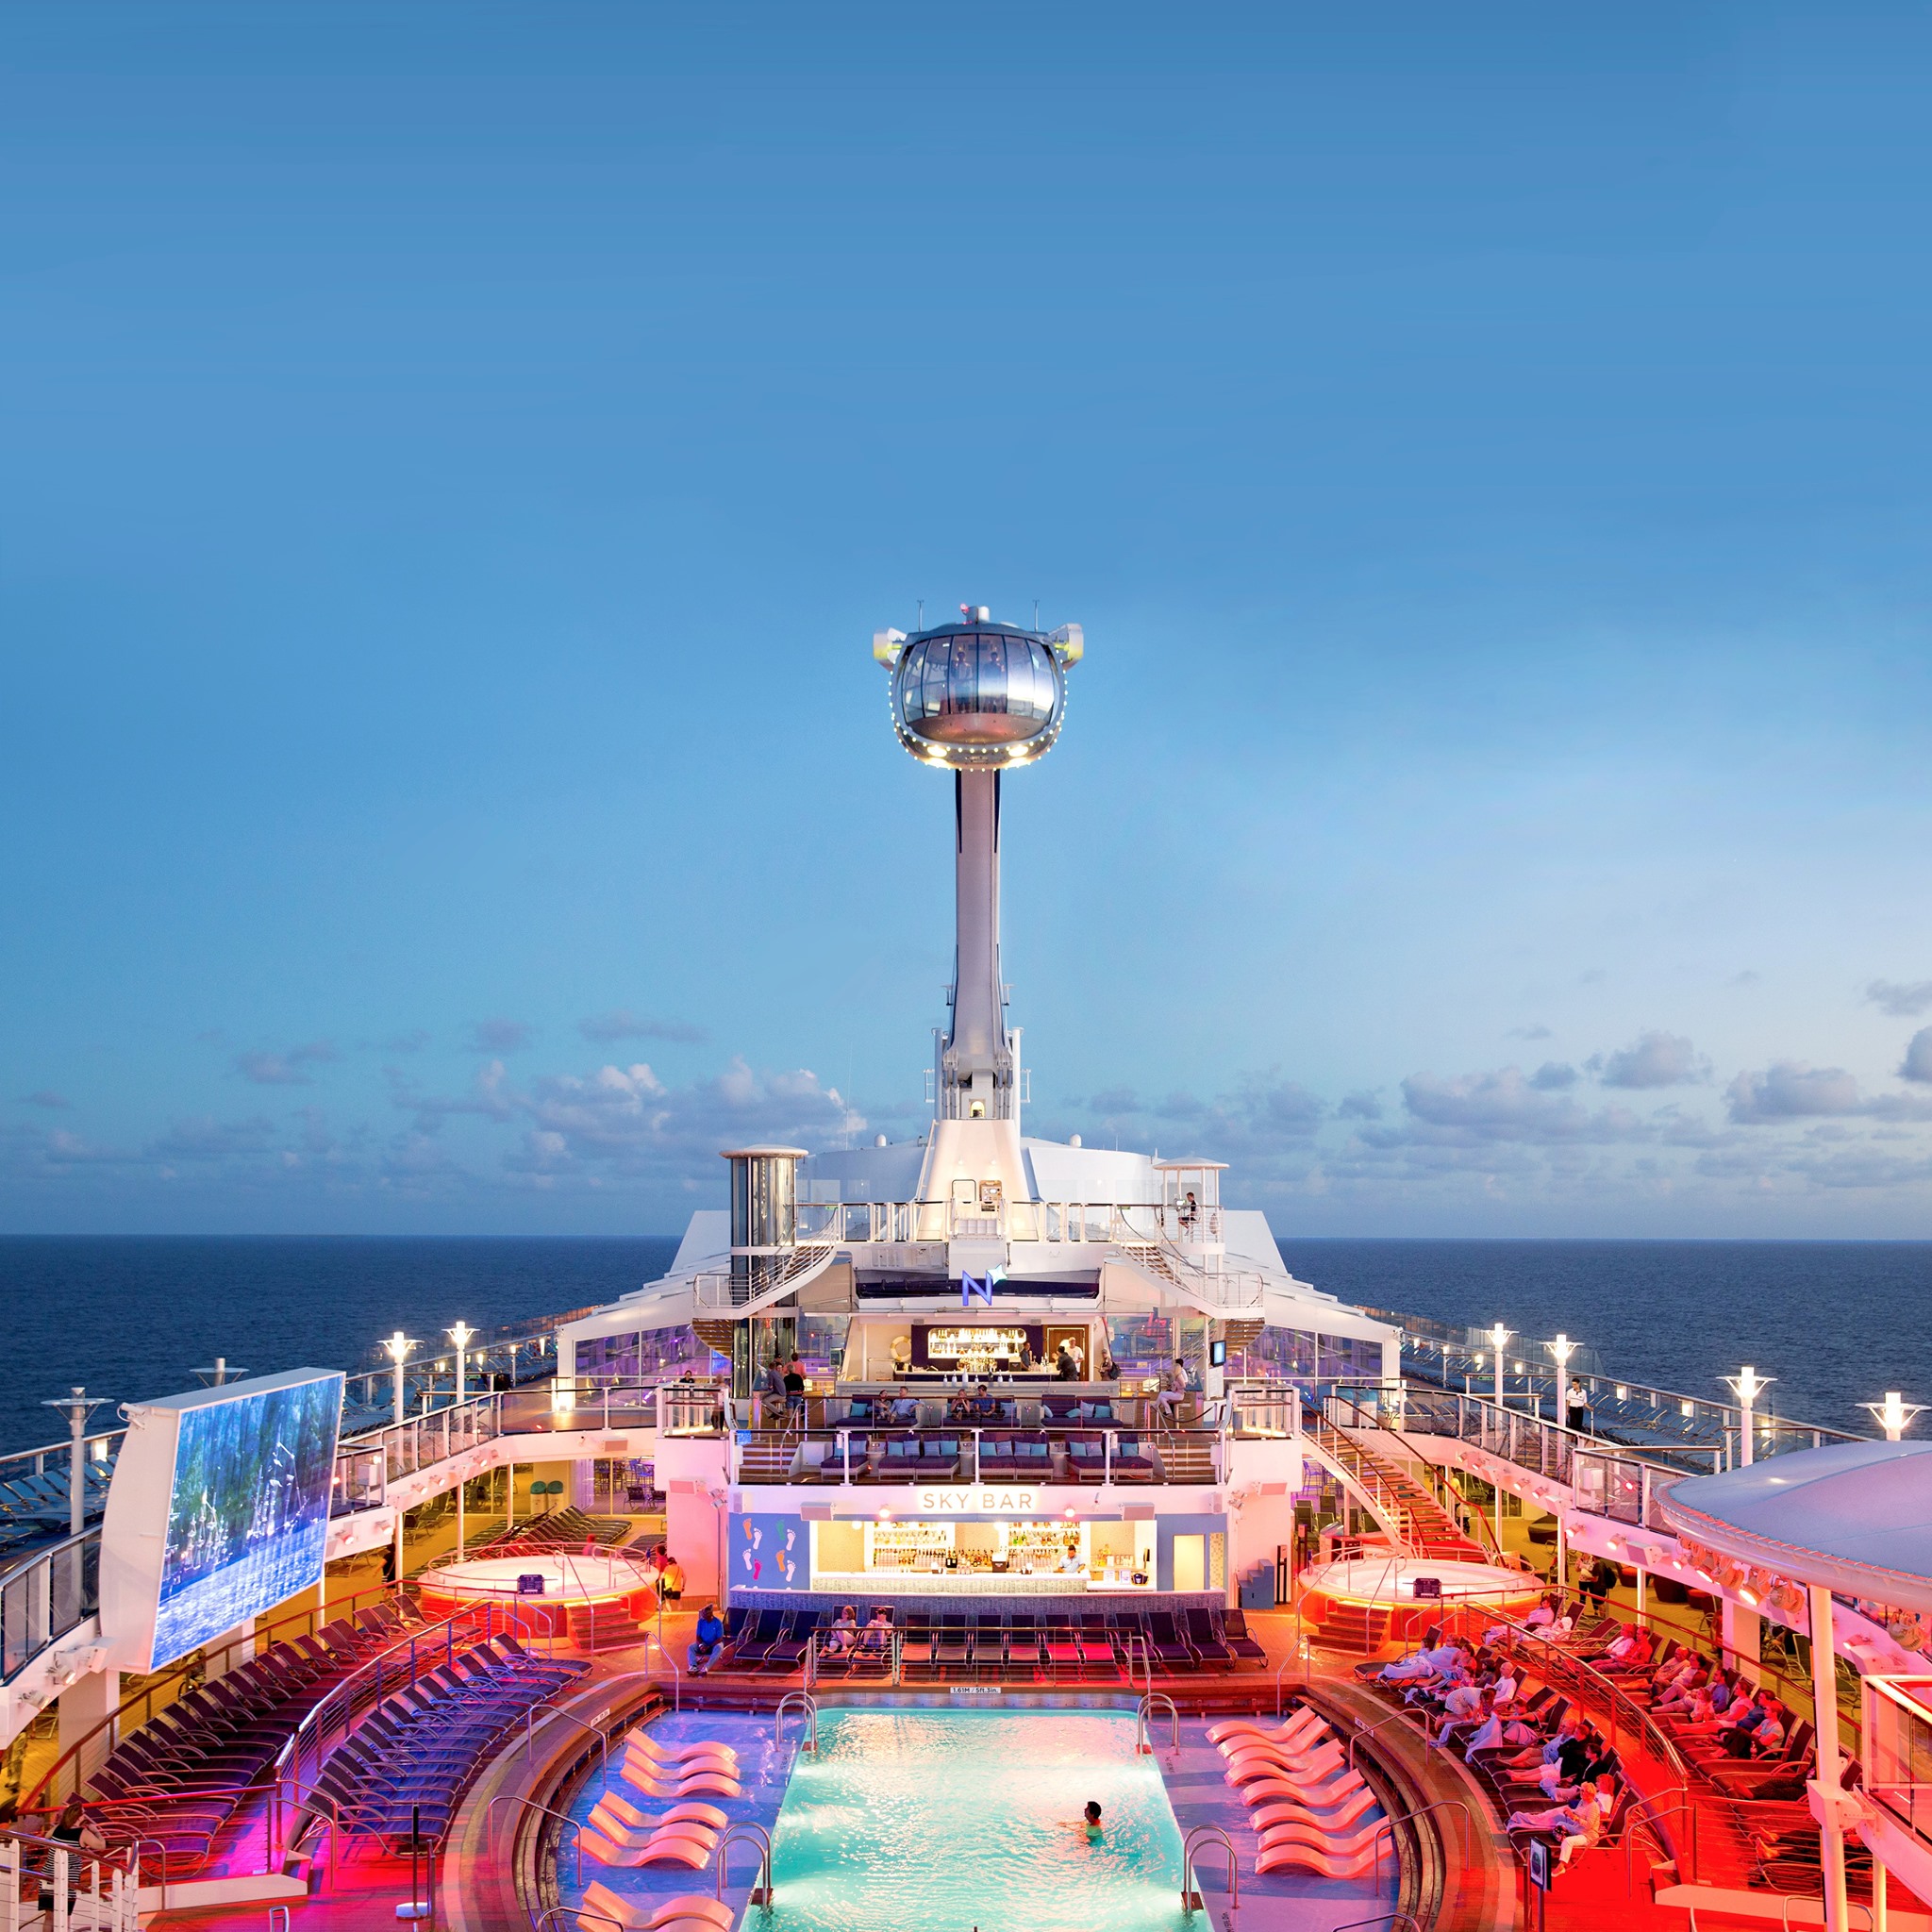 Royal Caribbean's cruise to nowhere sees bookings go up by 500%, first